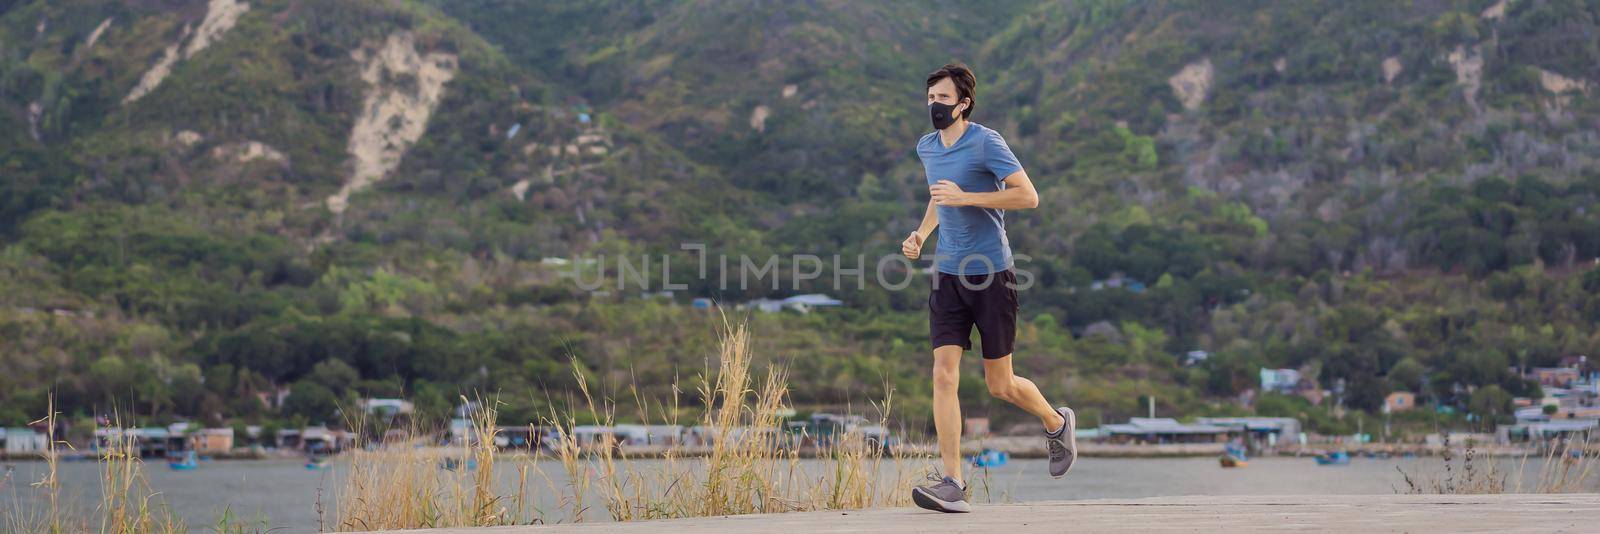 Runner wearing medical mask, Coronavirus pandemic Covid-19. Sport, Active life in quarantine surgical sterilizing face mask protection. Outdoor run on athletics track in Corona Outbreak. BANNER, LONG FORMAT